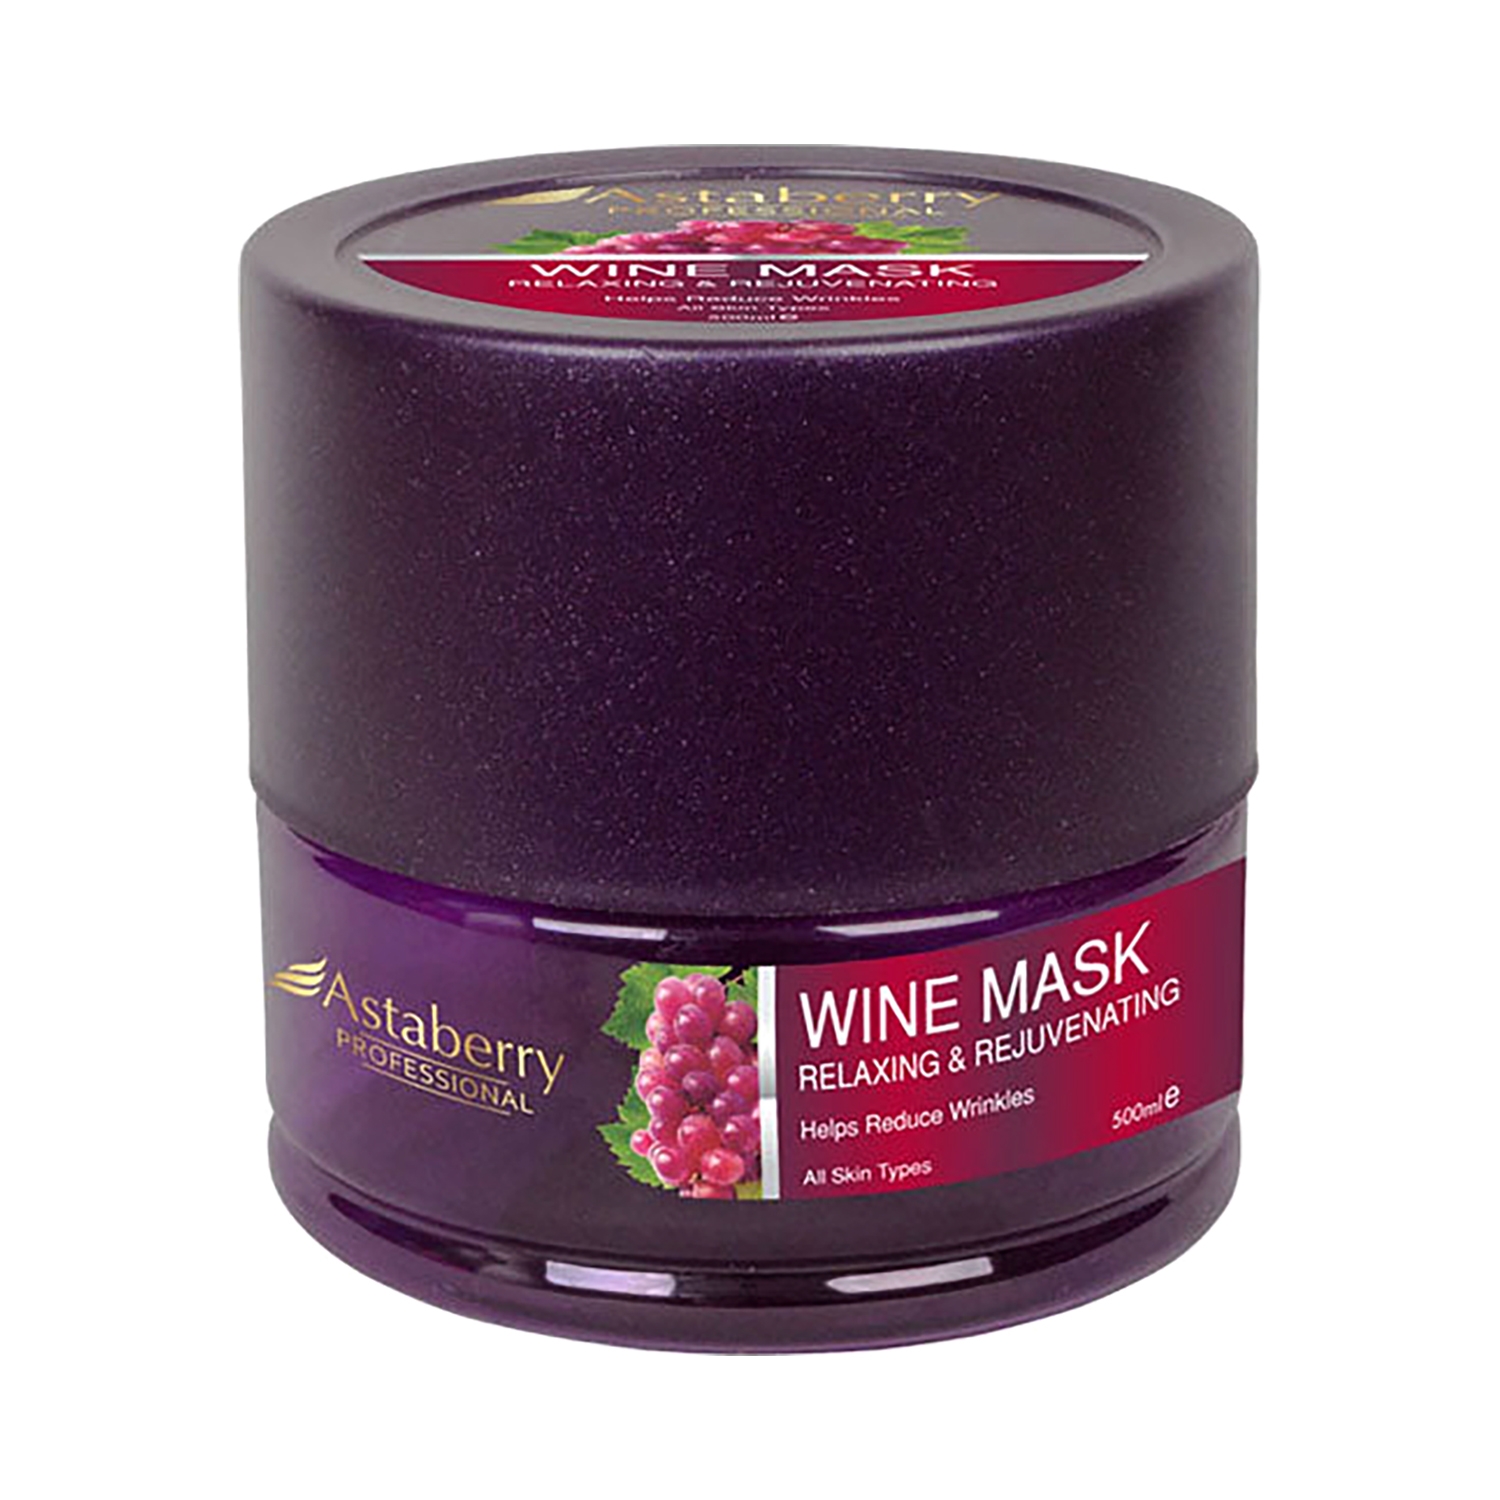 Astaberry | Astaberry Professional Wine Mask (500ml)